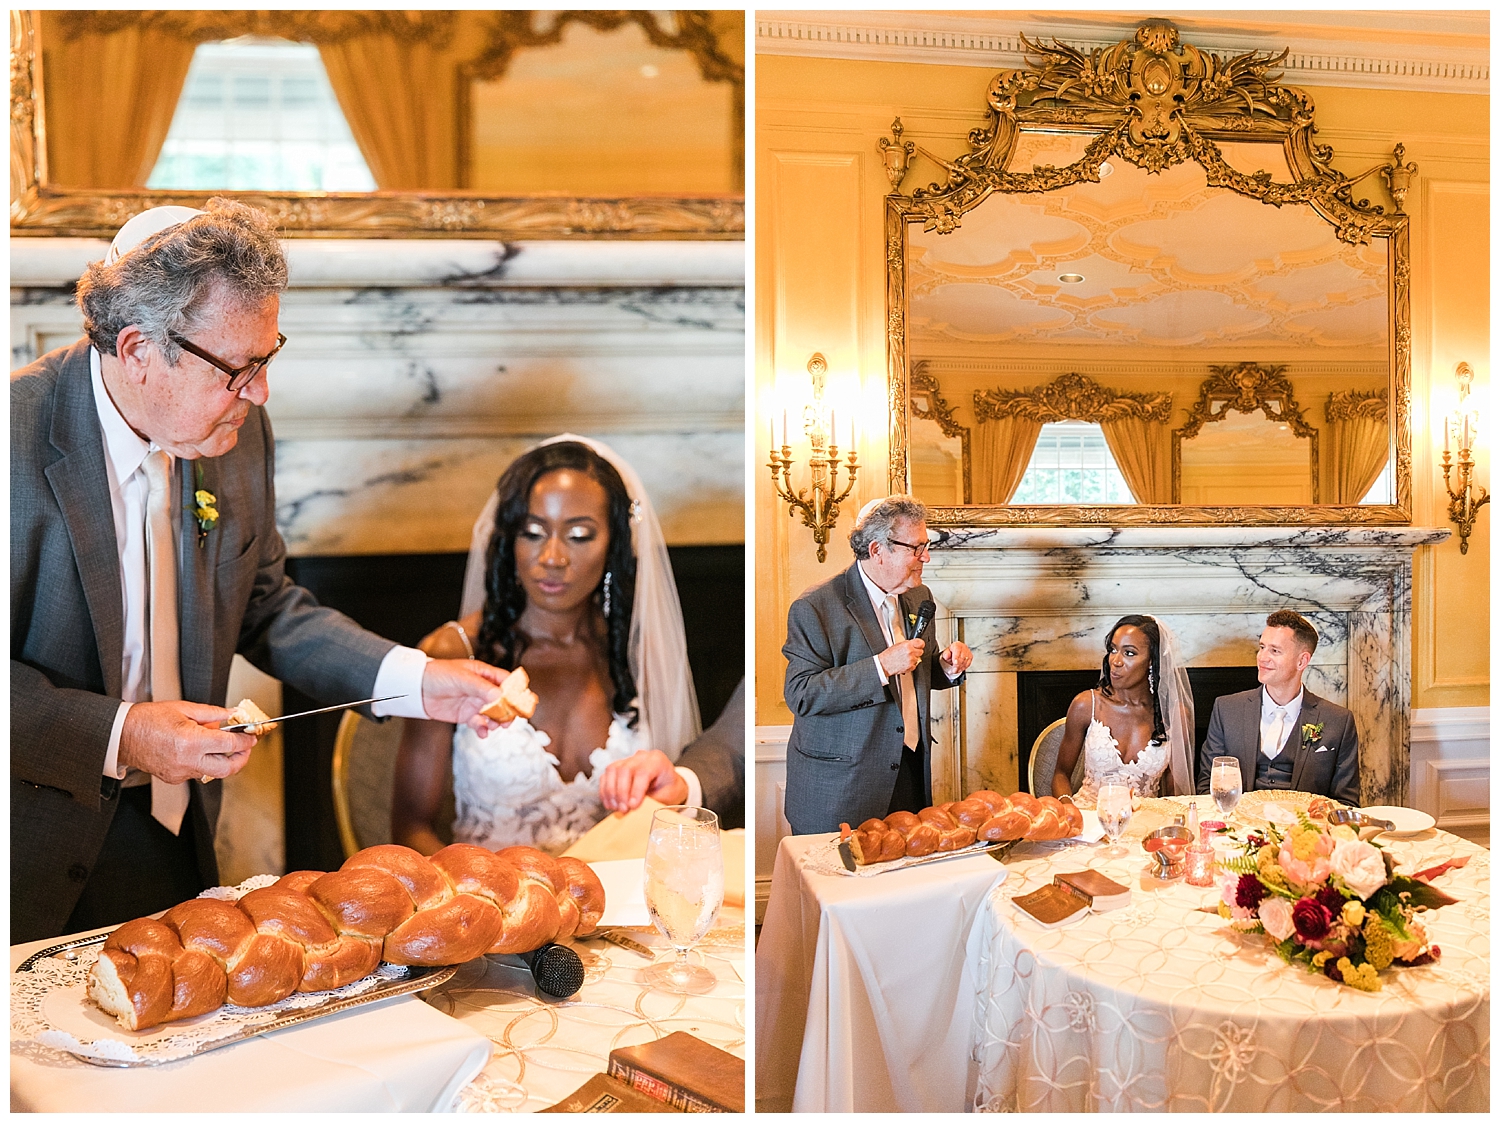  the father of the groom performed the blessing of the challah. 